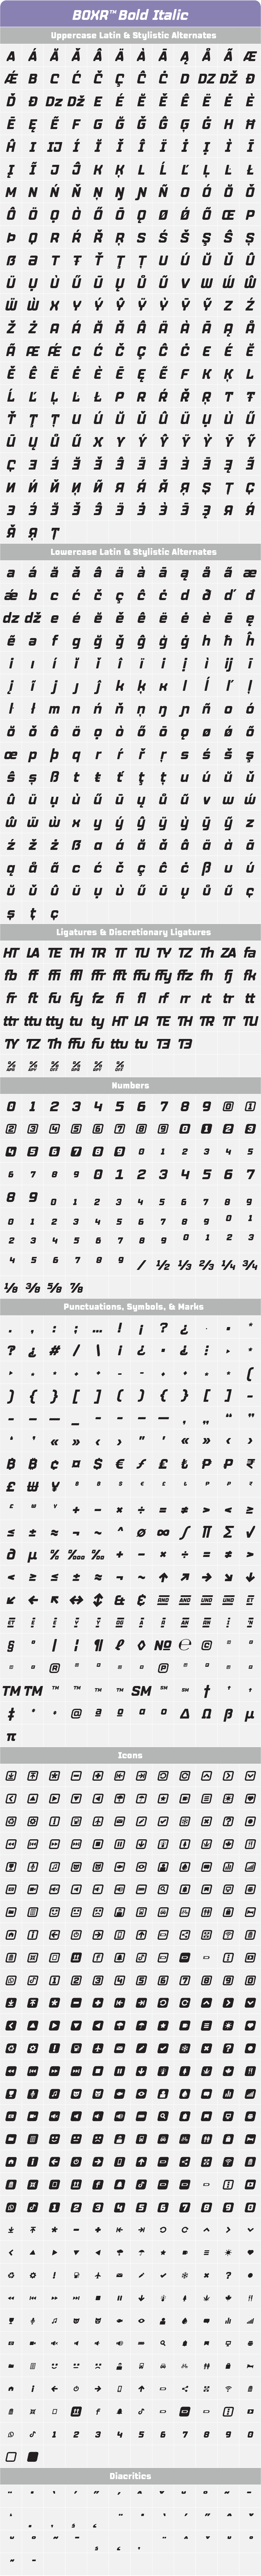 Boxr-Fonts-Bold-Italic-Glyph-Tables.png